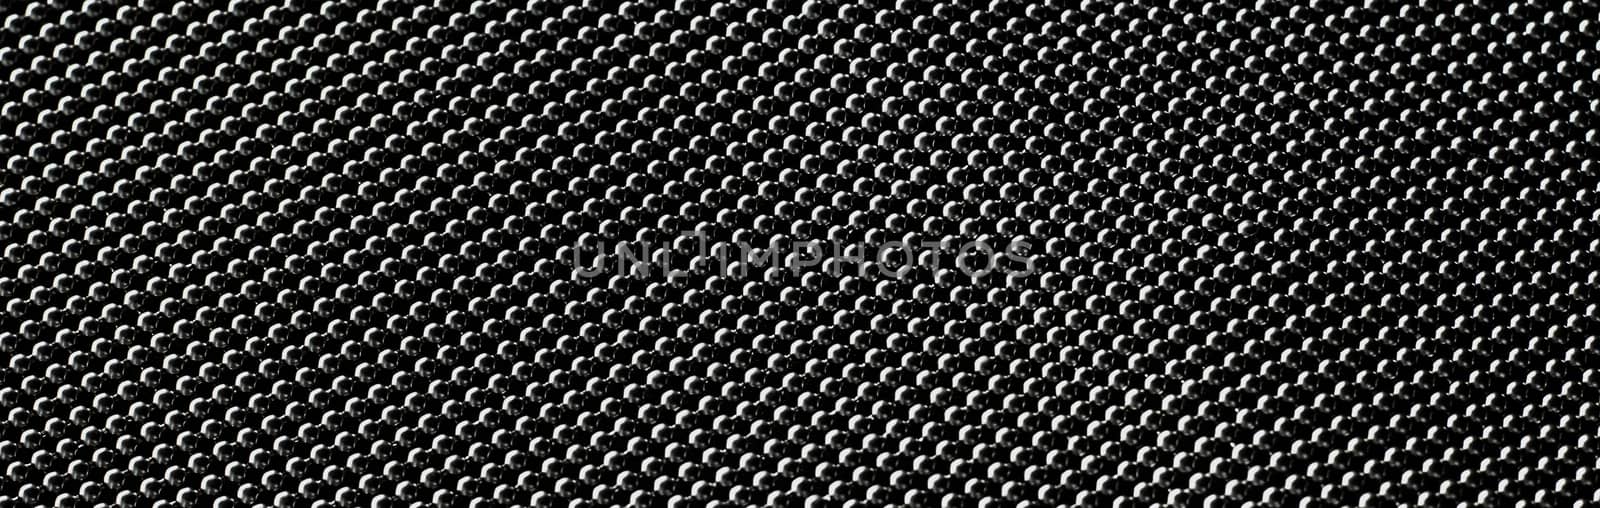 Black metallic abstract background, futuristic surface and high tech materials